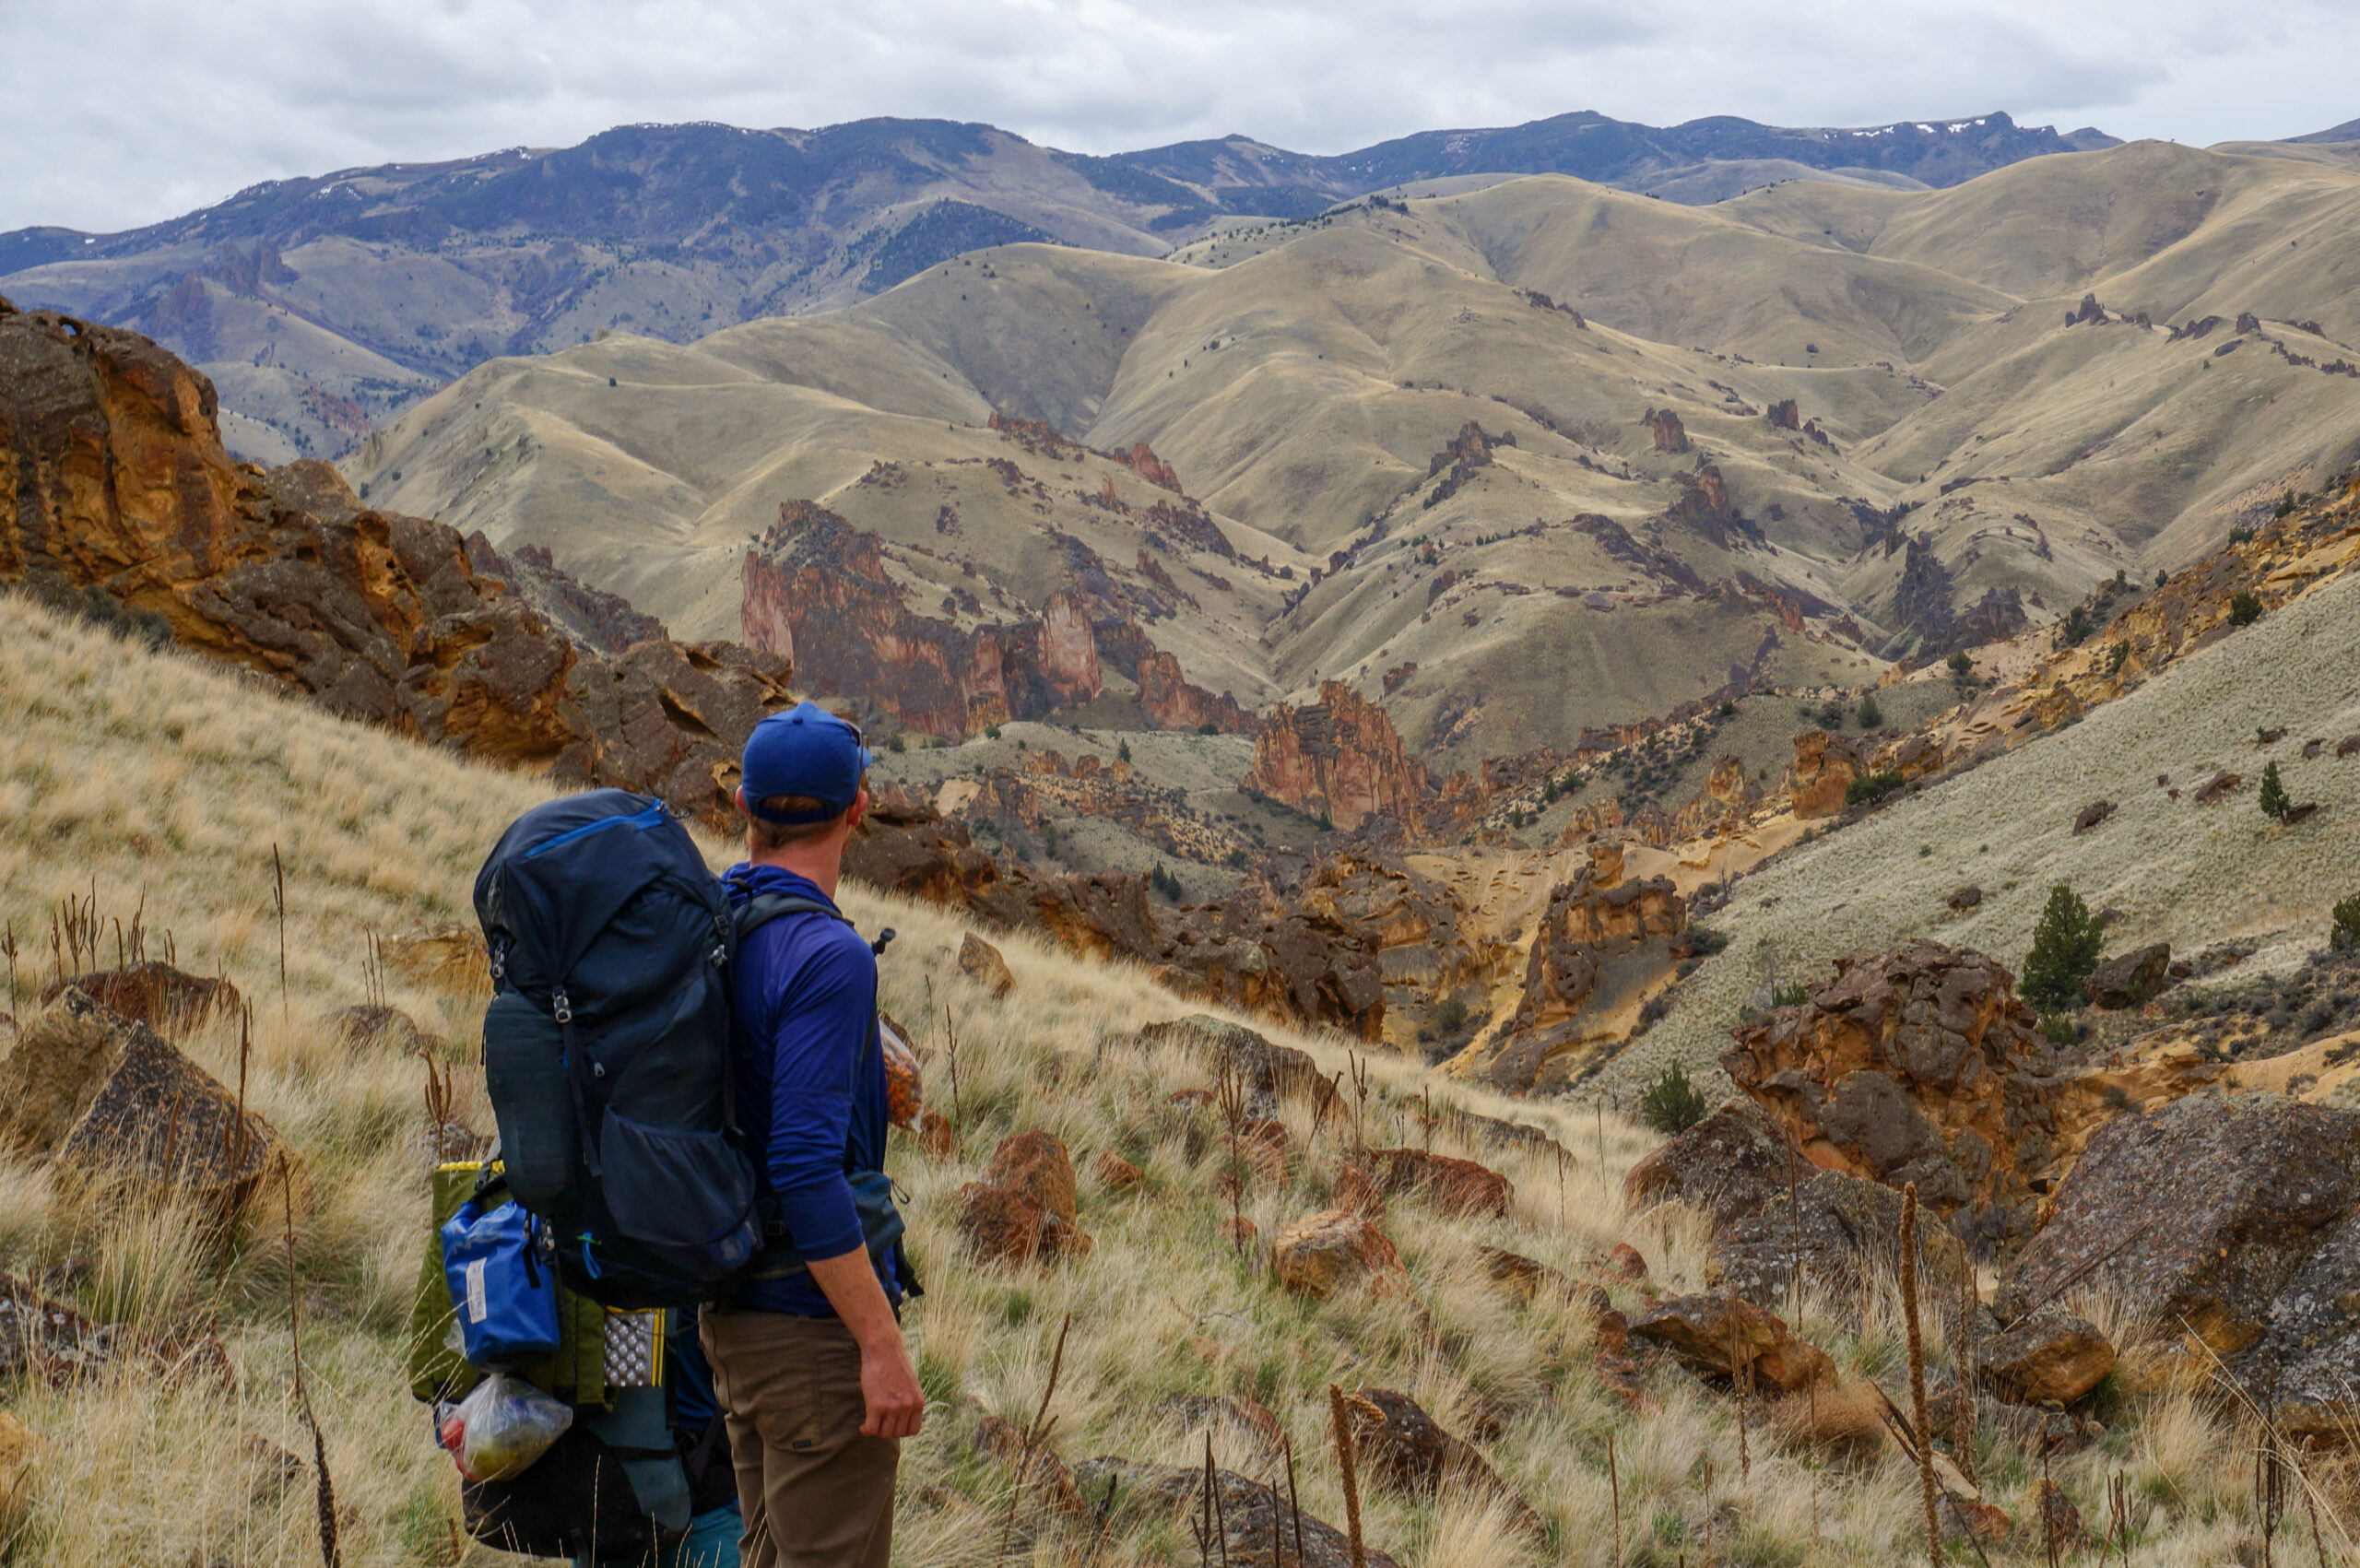 Owyhee River Wilderness Area – A Protected Place